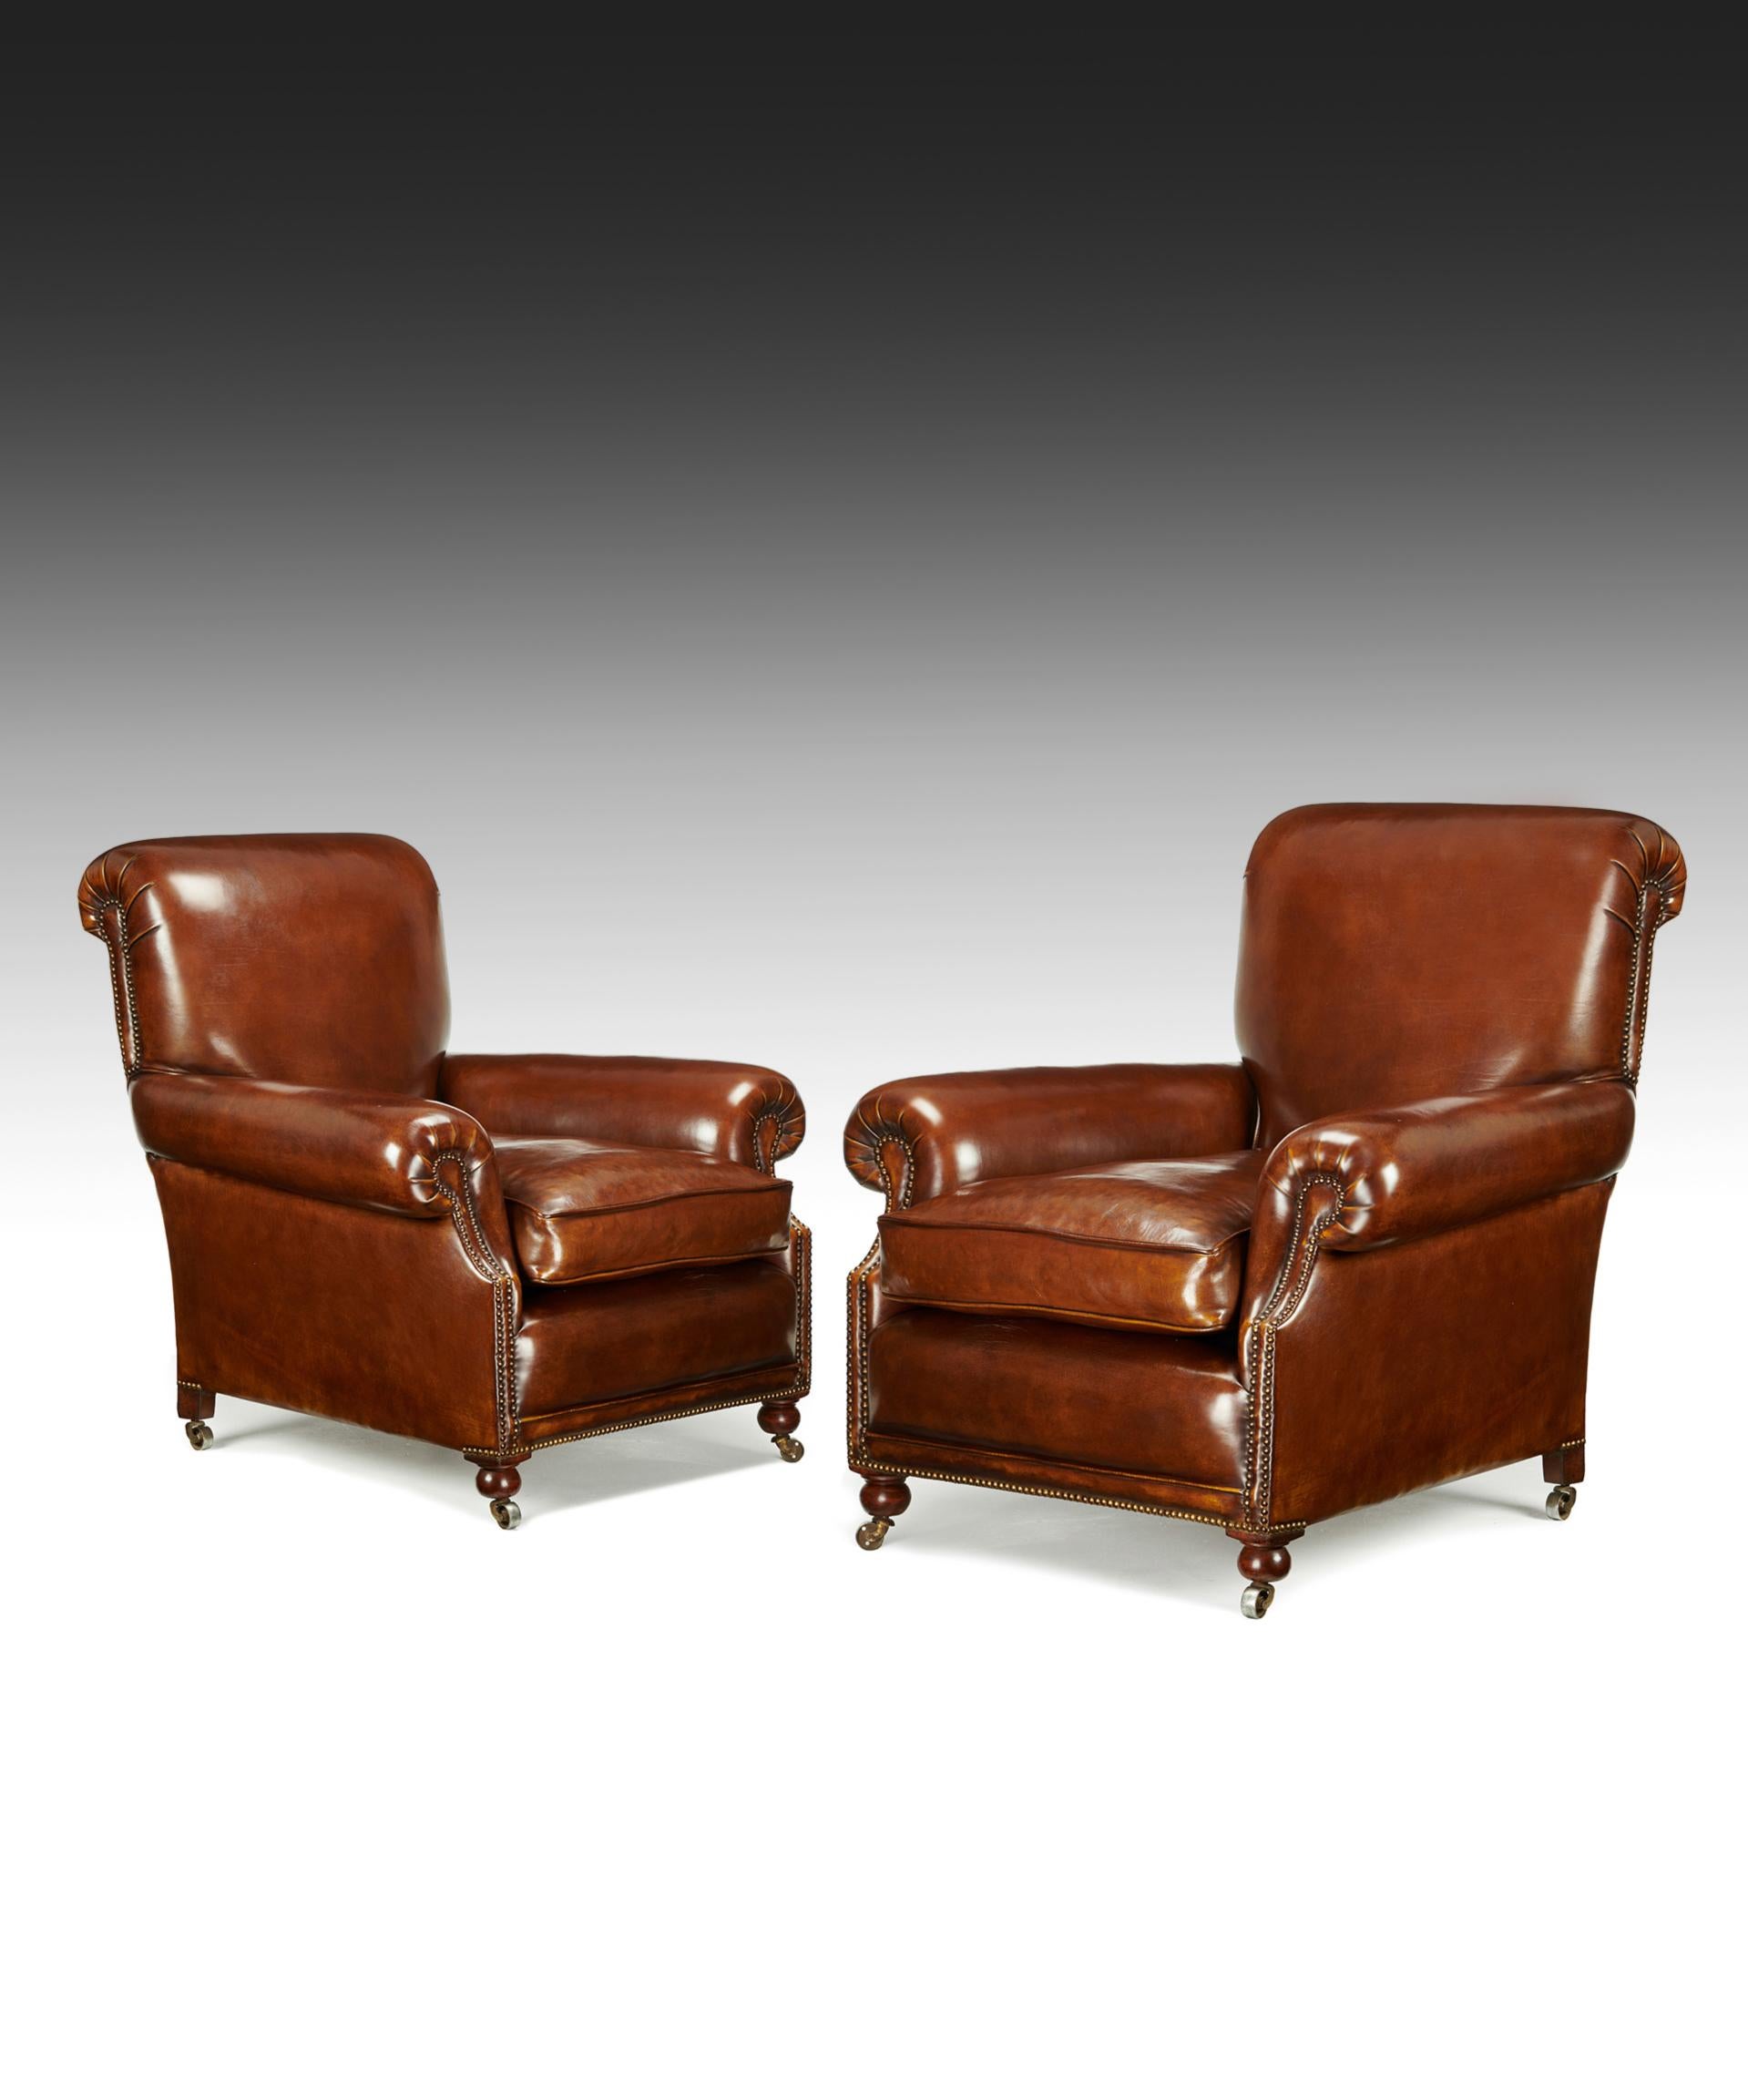 A fine pair of antique leather club chairs raised on turned front bun feet and castors of good proportions 

English, 19th century

This large pair of club chairs dating to circa 1870 have a beautifully scrolled high back with recessed out-swept